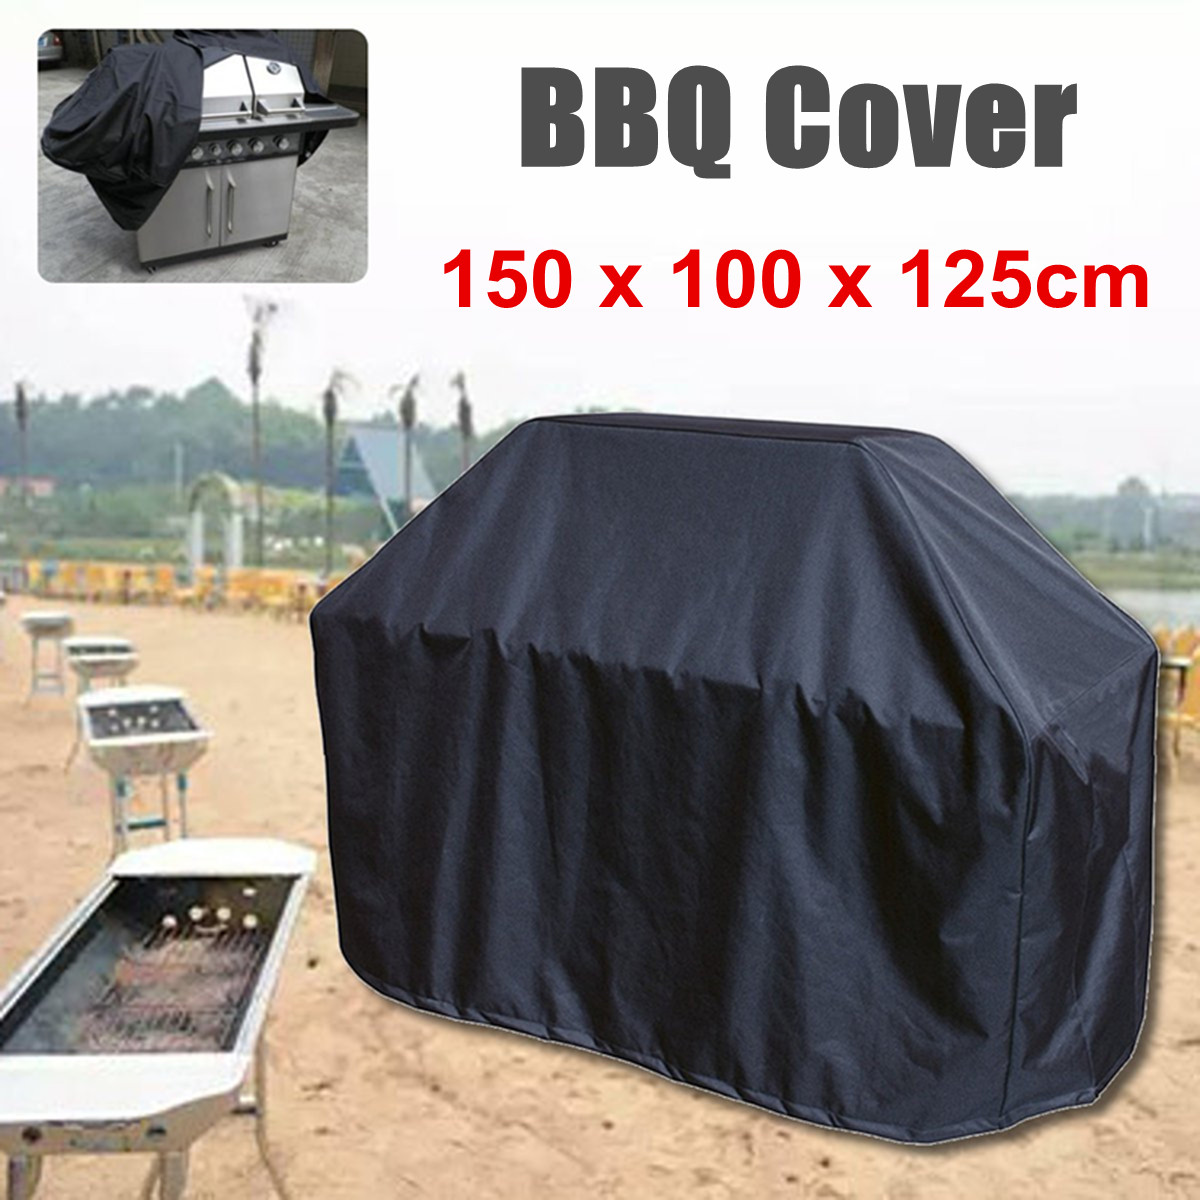 59-Inch-BBQ-Grill-Barbecue-Waterproof-Cover-Heavy-Duty-UV-Protector-Outdoor-Yard-Camping-1352191-1